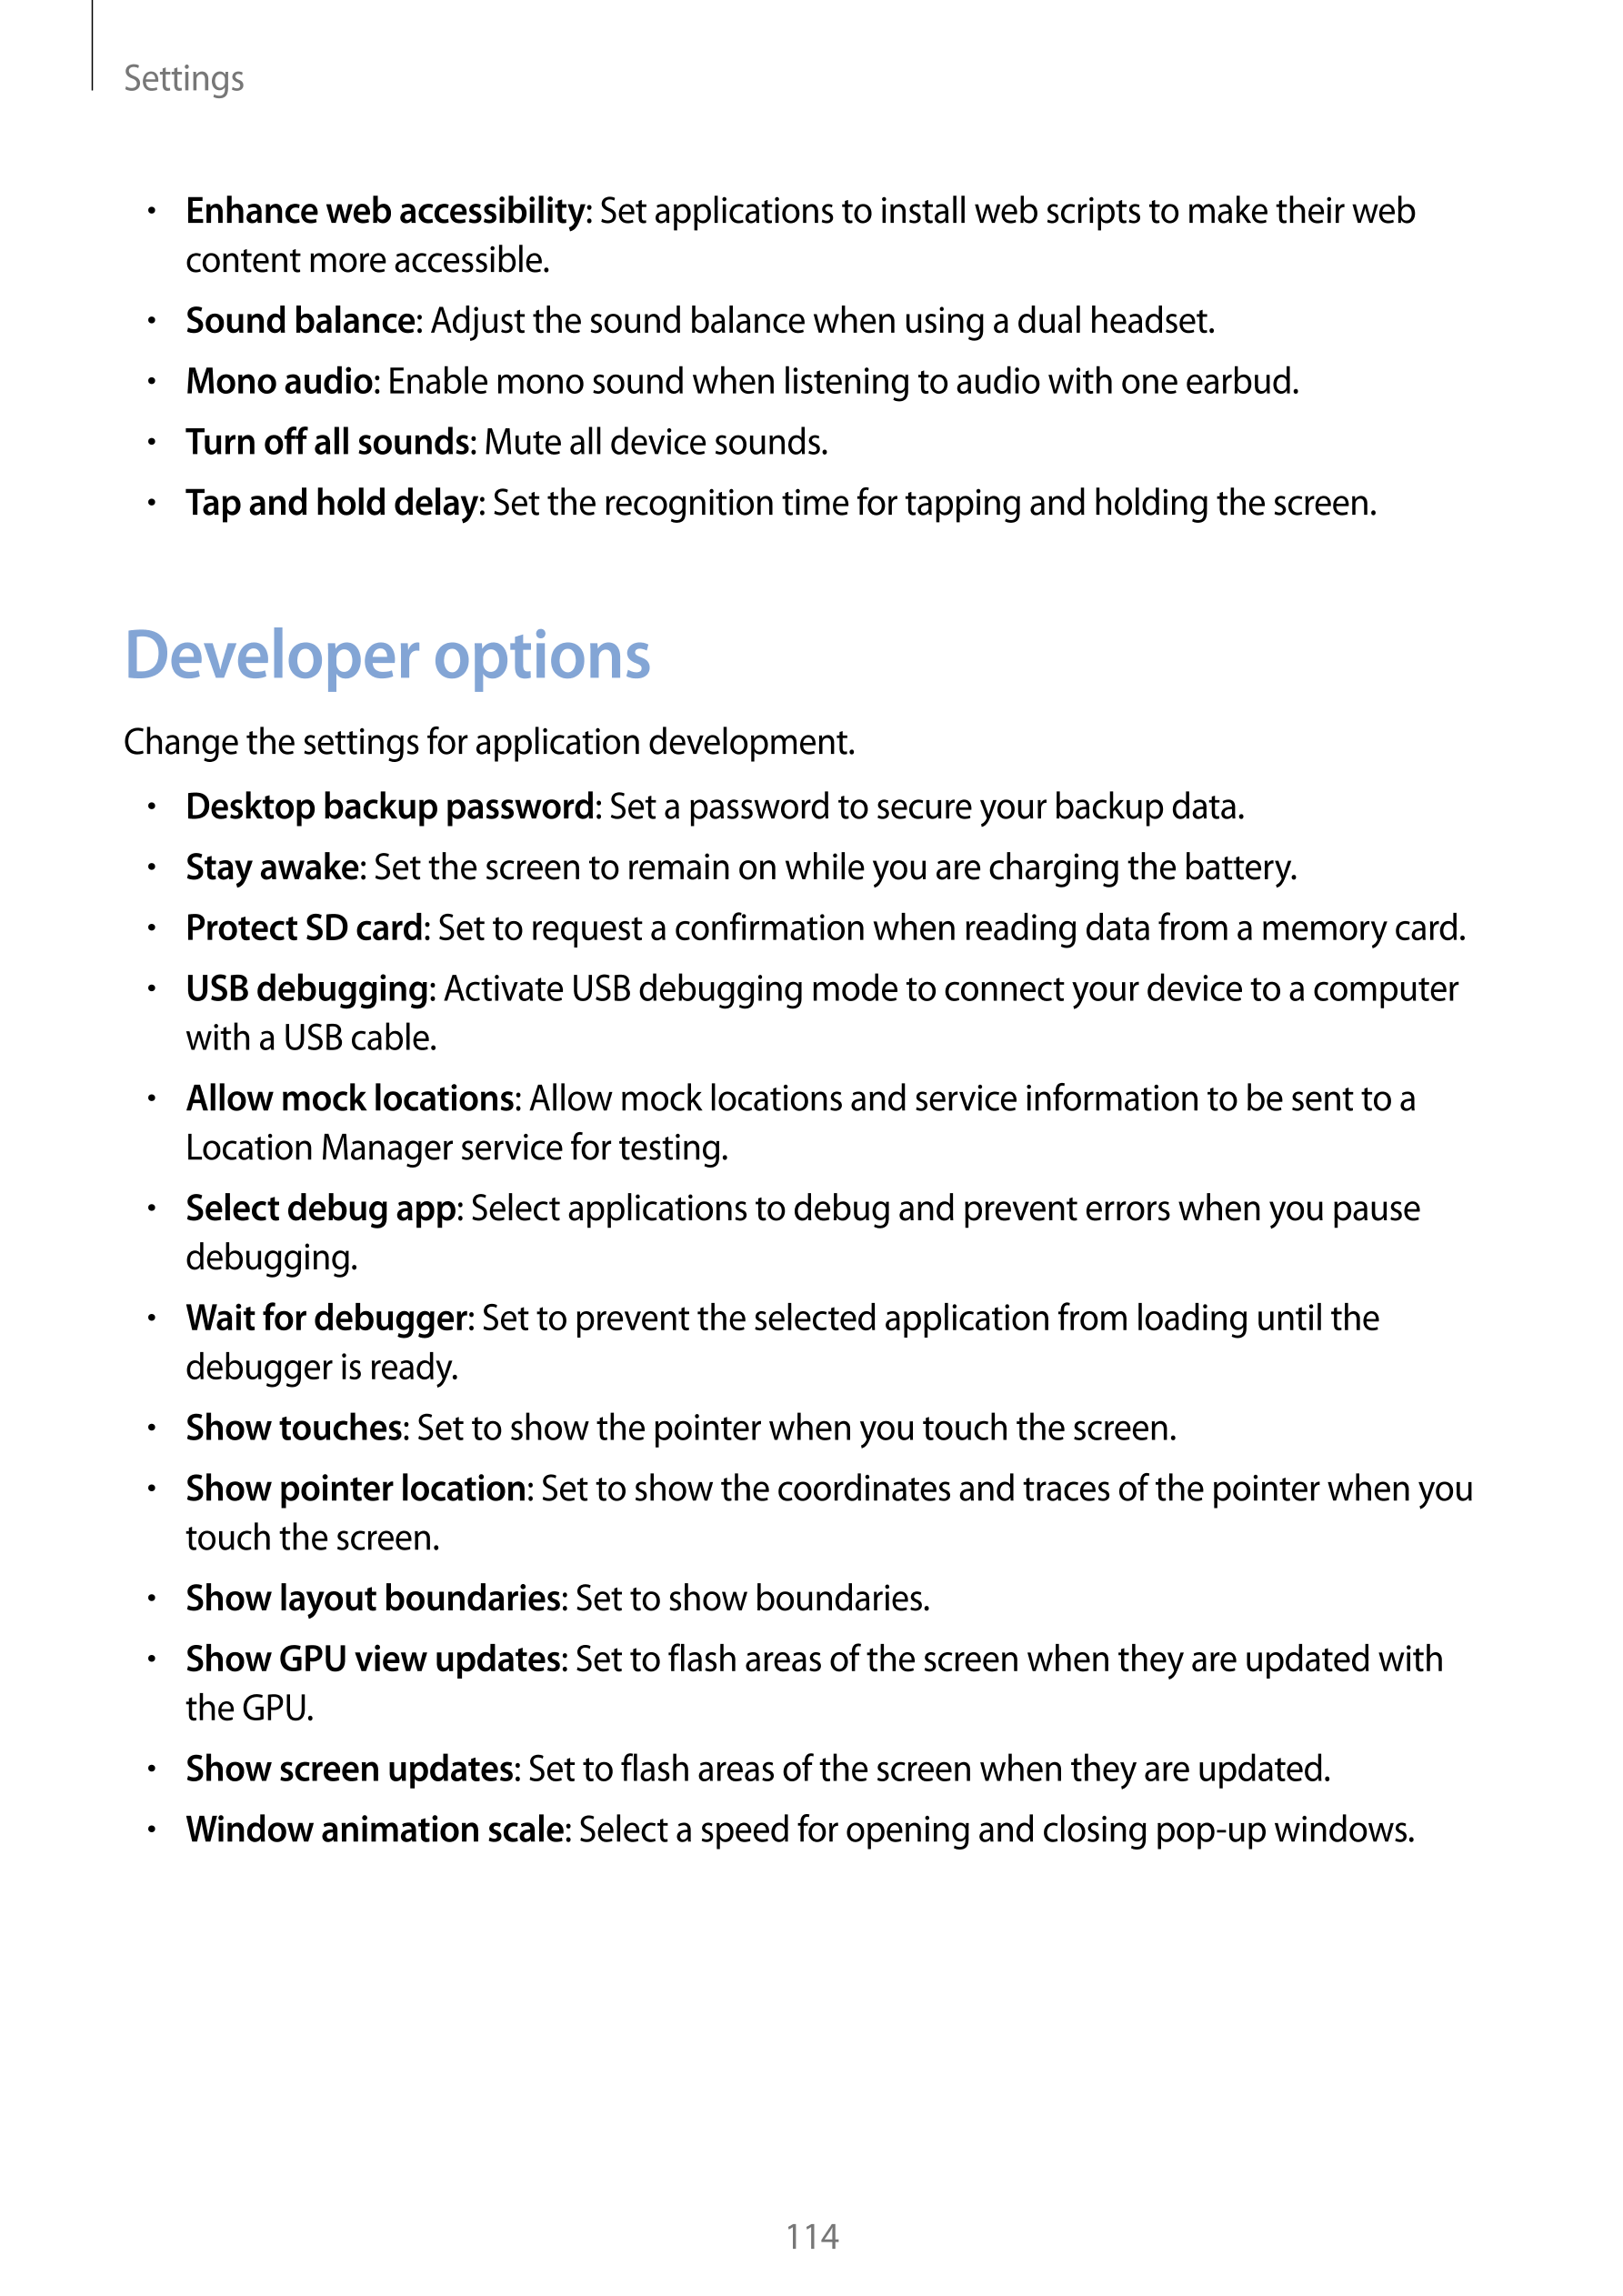 Settings
•     : Set applications to install web scripts to make their web Enhance web accessibility
content more accessible.
• 